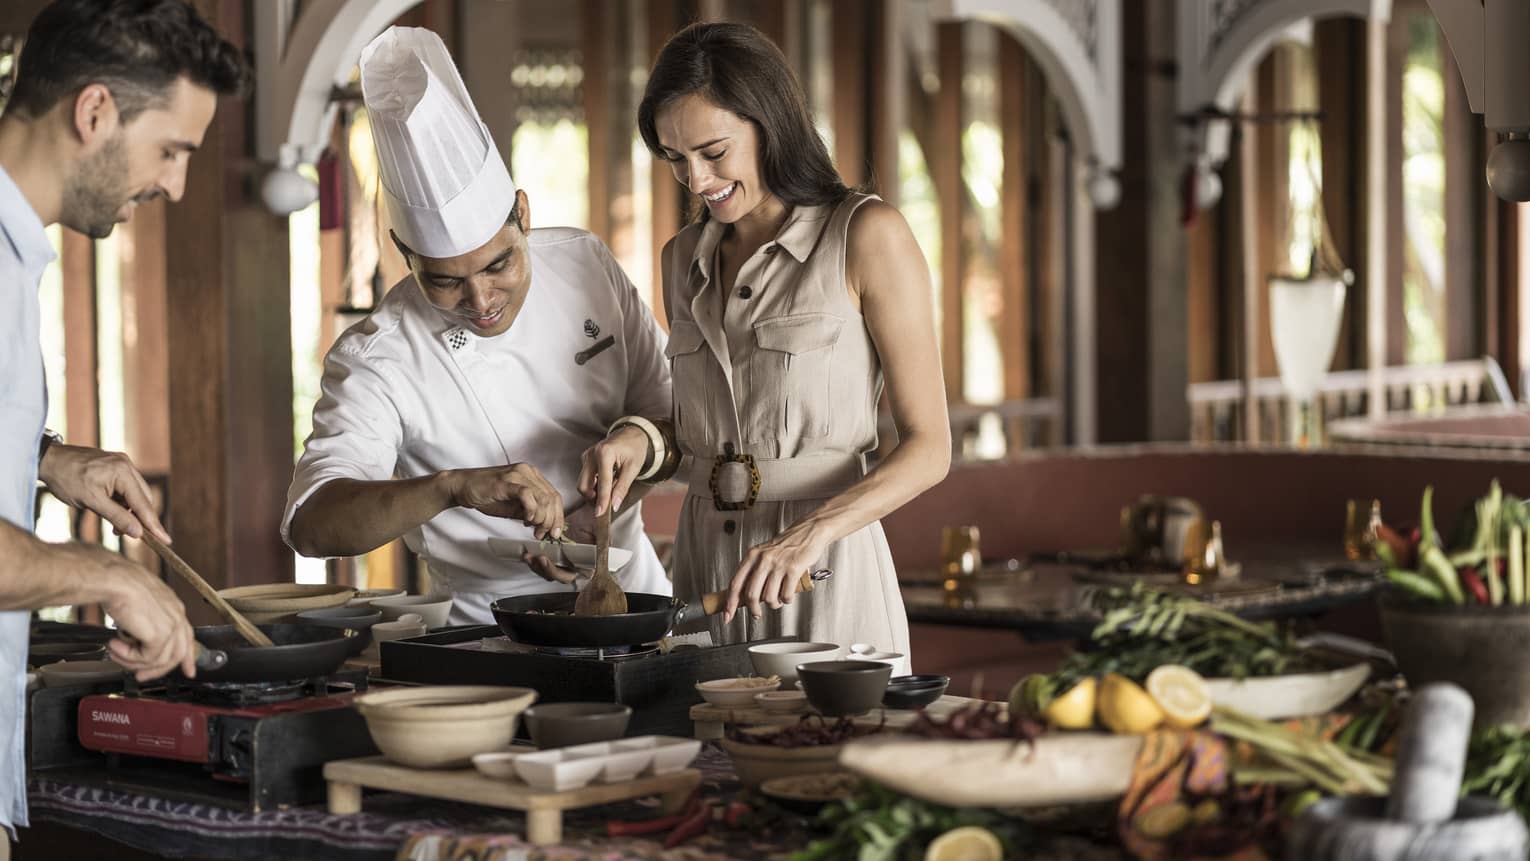 A chef is instructing a man and woman in the Ikan Ikan Cooking Class